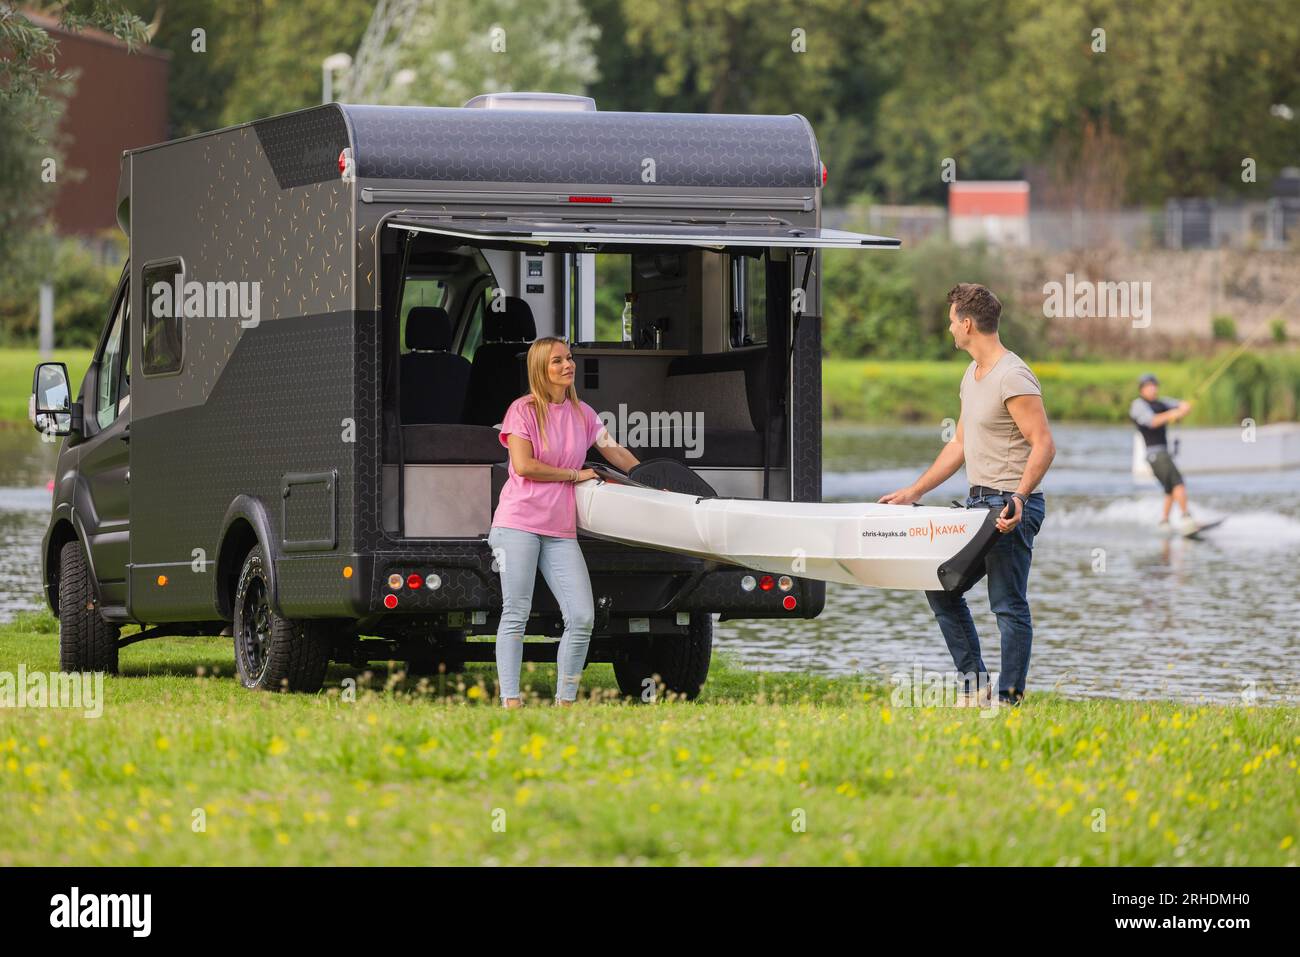 https://c8.alamy.com/comp/2RHDMH0/duisburg-germany-16th-aug-2023-models-ralf-and-isabell-push-a-canoe-into-the-yoka-go-motorhome-semi-integrated-motorhome-from-dethleffs-during-a-photo-session-in-the-run-up-to-the-caravan-salon-at-the-water-ski-facility-the-caravan-salon-is-the-worlds-largest-trade-fair-for-motorhomes-and-caravans-and-will-be-held-from-aug-26-to-sept-3-2023-around-750-exhibitors-are-expected-at-the-62nd-edition-the-motto-of-this-years-edition-is-passion-that-connects-credit-rolf-vennenbernddpaalamy-live-news-2RHDMH0.jpg